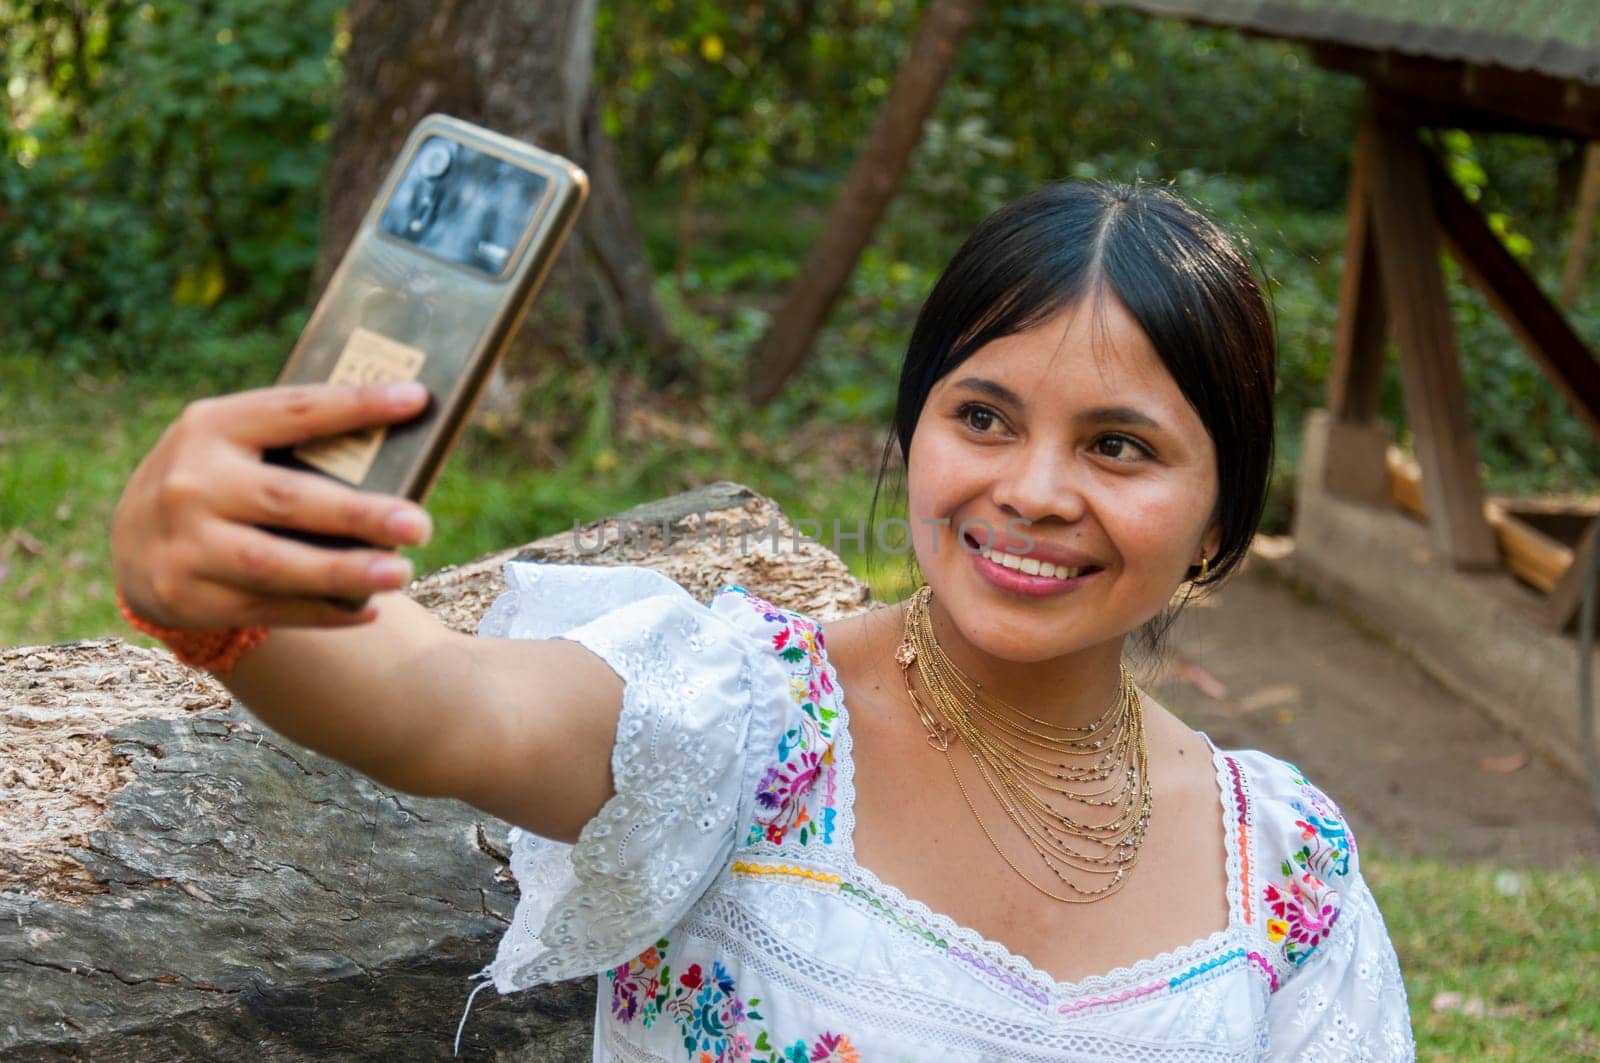 Amazonian Chic. Capturing the Essence of Ecuador's Indigenous Beauty in a Stunning Selfie by Raulmartin